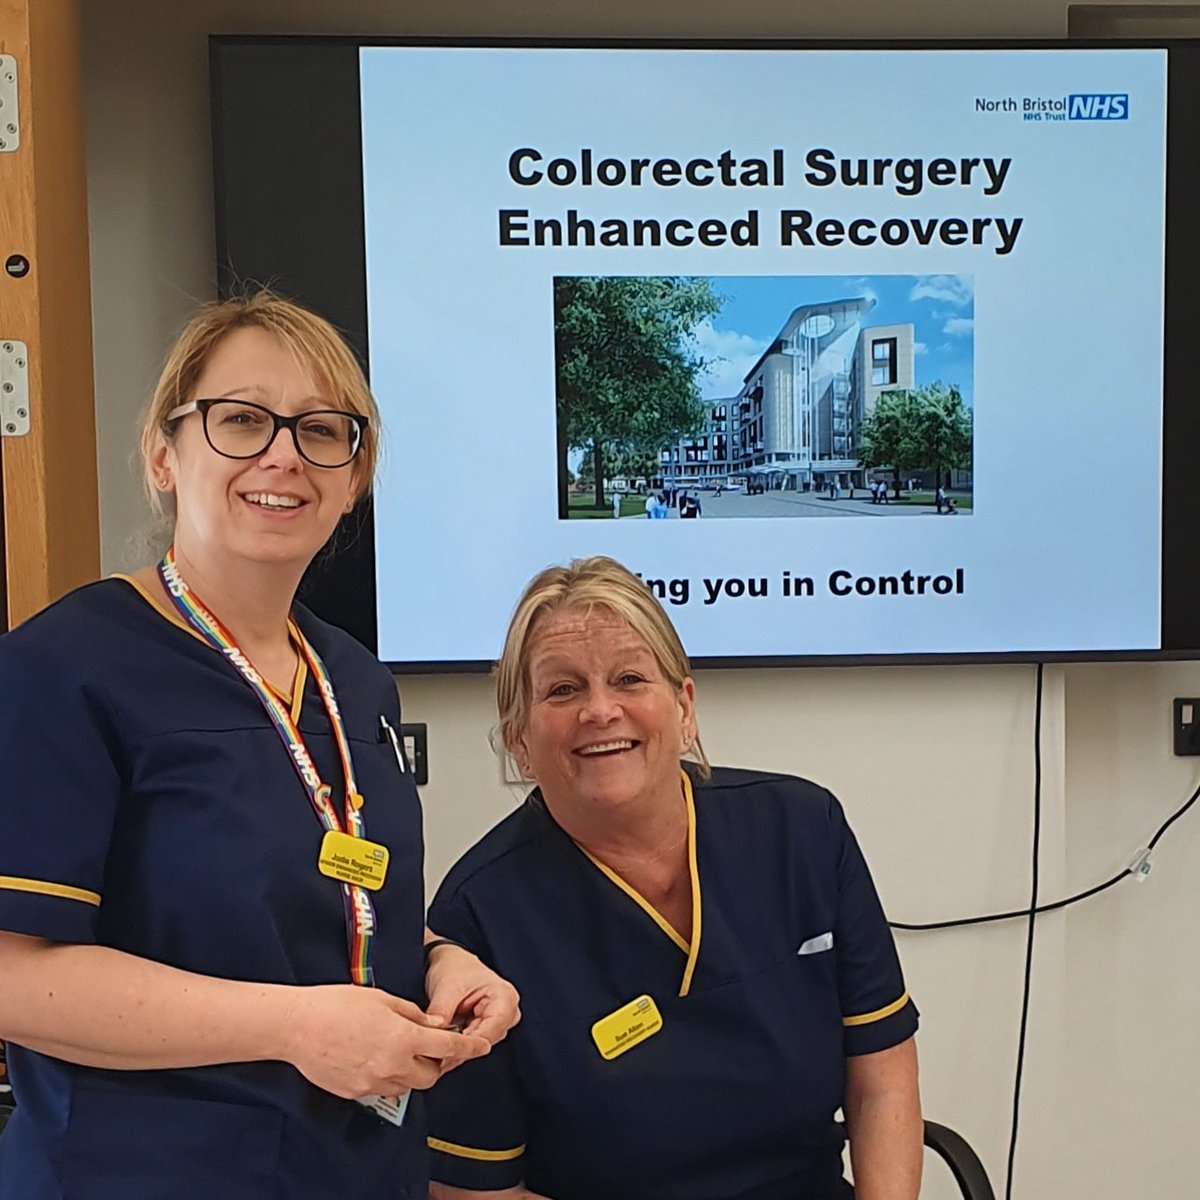 New weekly Patient Education Group in the Macmillan Wellbeing Centre. We  are delighted to support Jodie and Sue from Enhanced Recovery, enabling patients to support their own recovery from #Bowelcancer surgery.
@DawnieGane @jodierogers77 @APullyblank @NorthBristolNHS #OneNBT